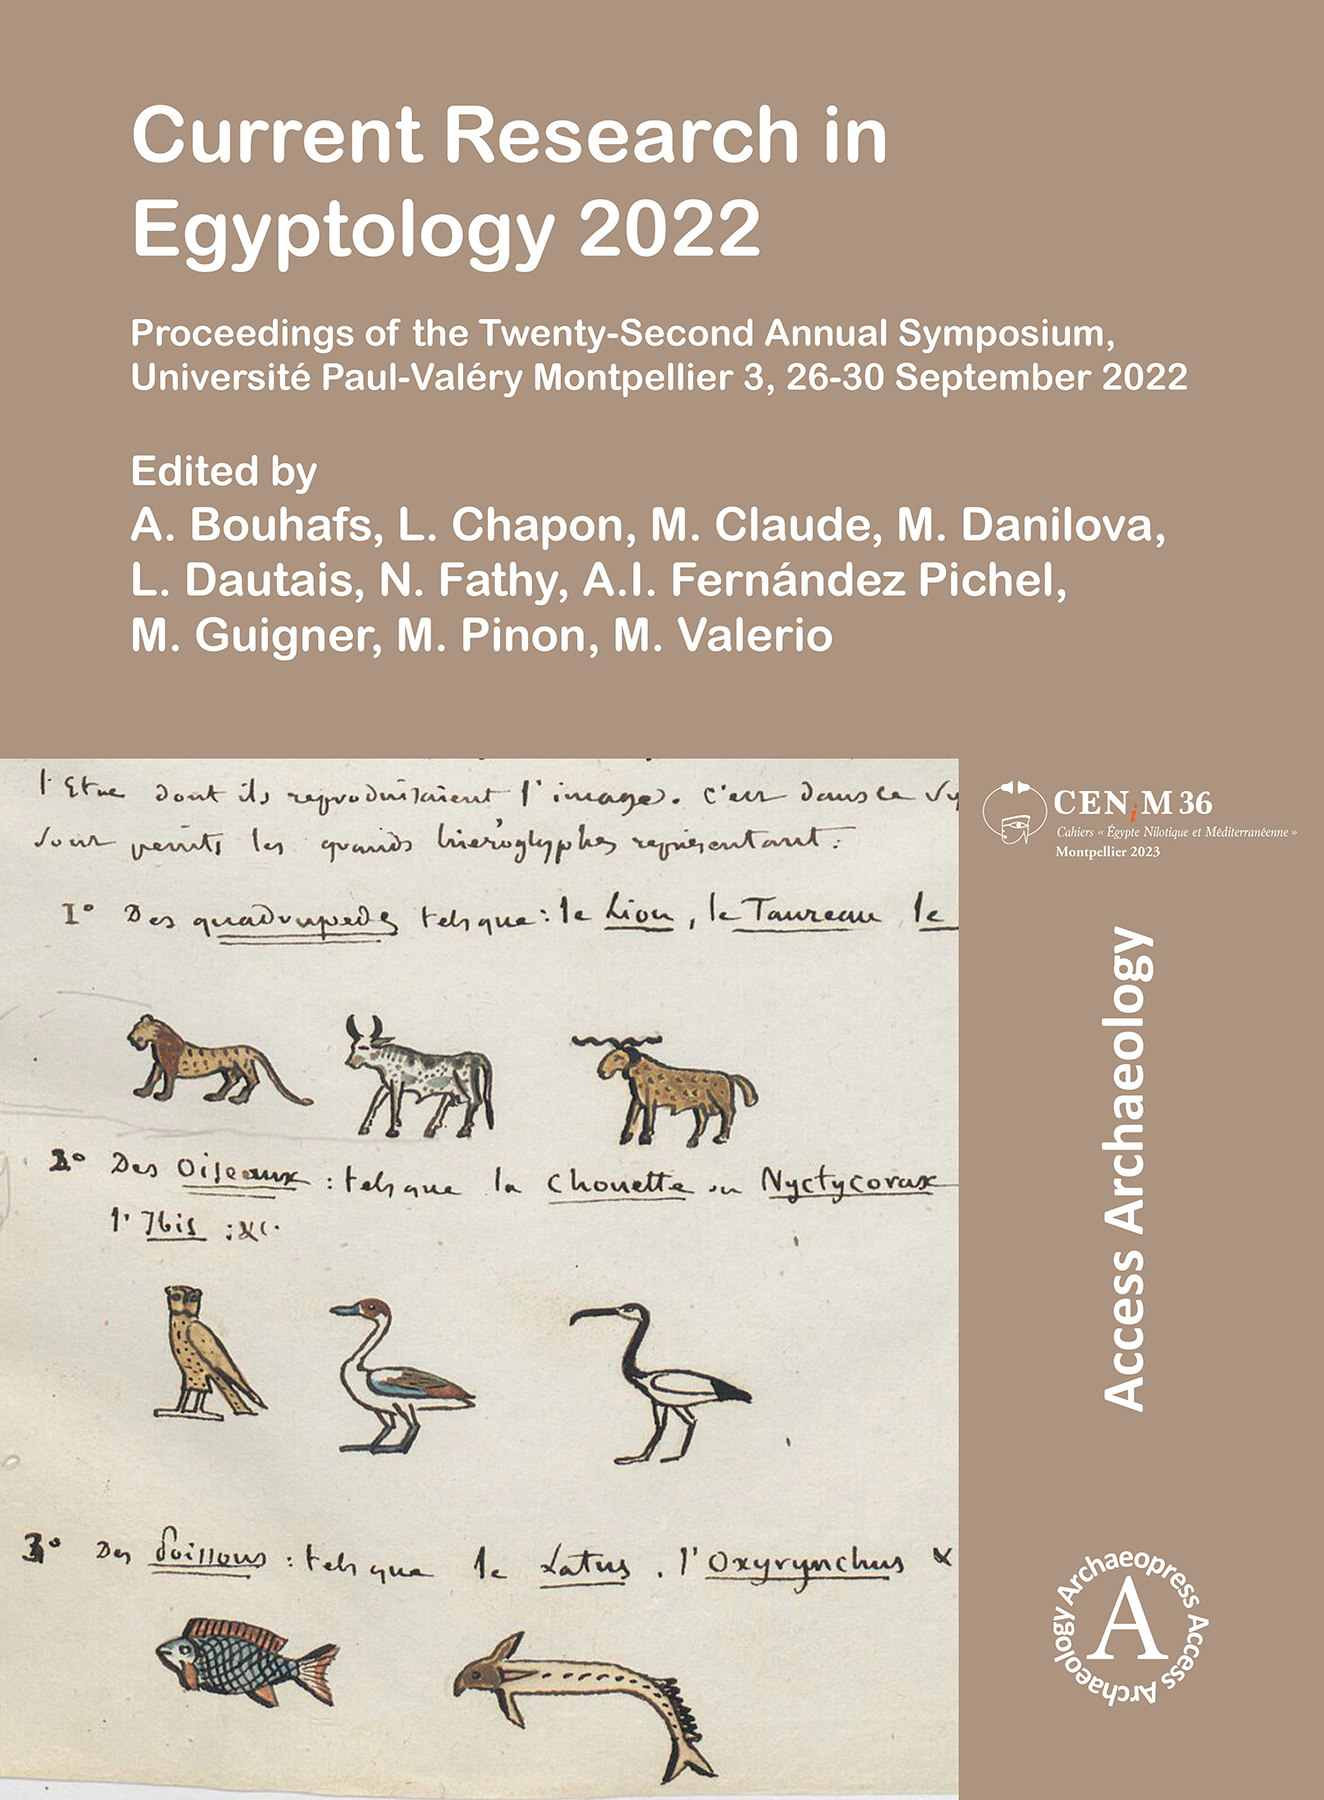 Current Research in Egyptology 2022. Proceedings of the Twenty-Second Annual Symposium, Université Paul-Valéry Montpellier 3, 26-30 September 2022